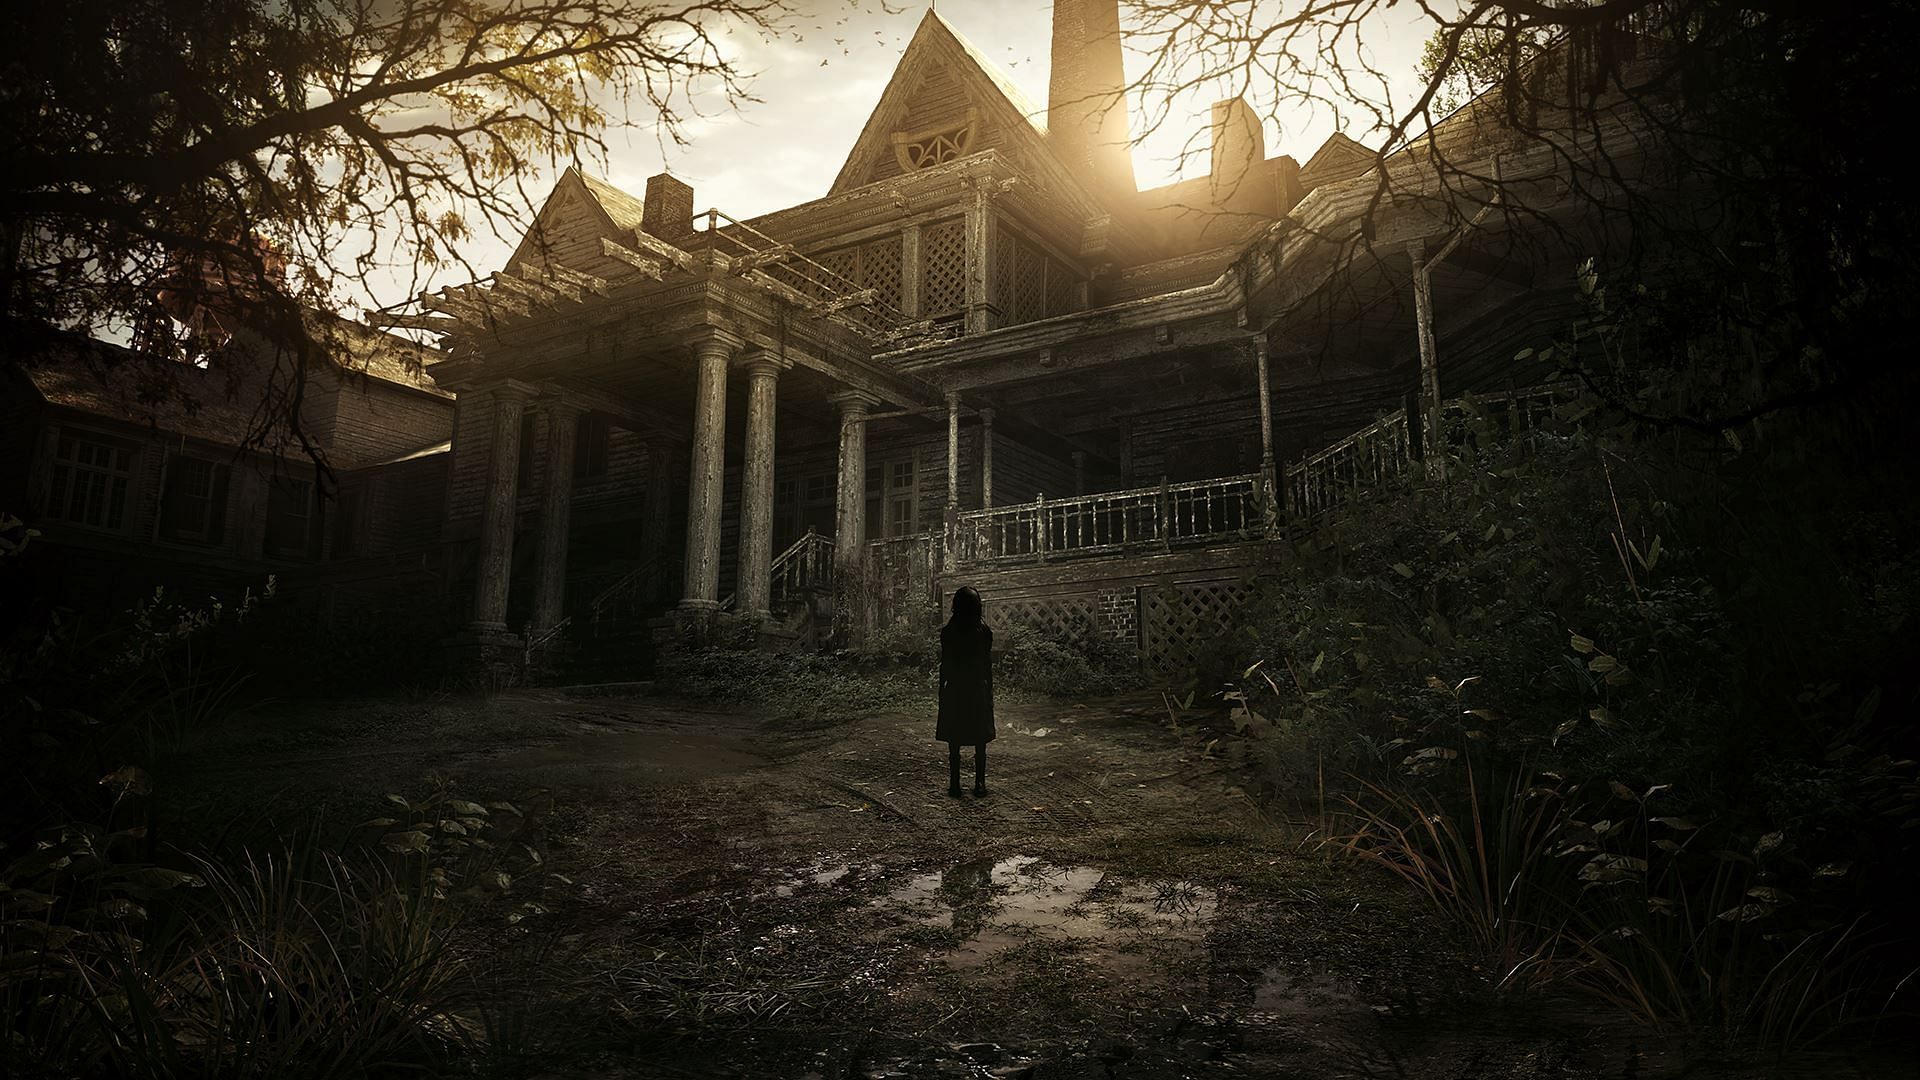 Resident Evil 7 is among the games getting a next-generation console upgrade for free - except for one edition (Image via Capcom)